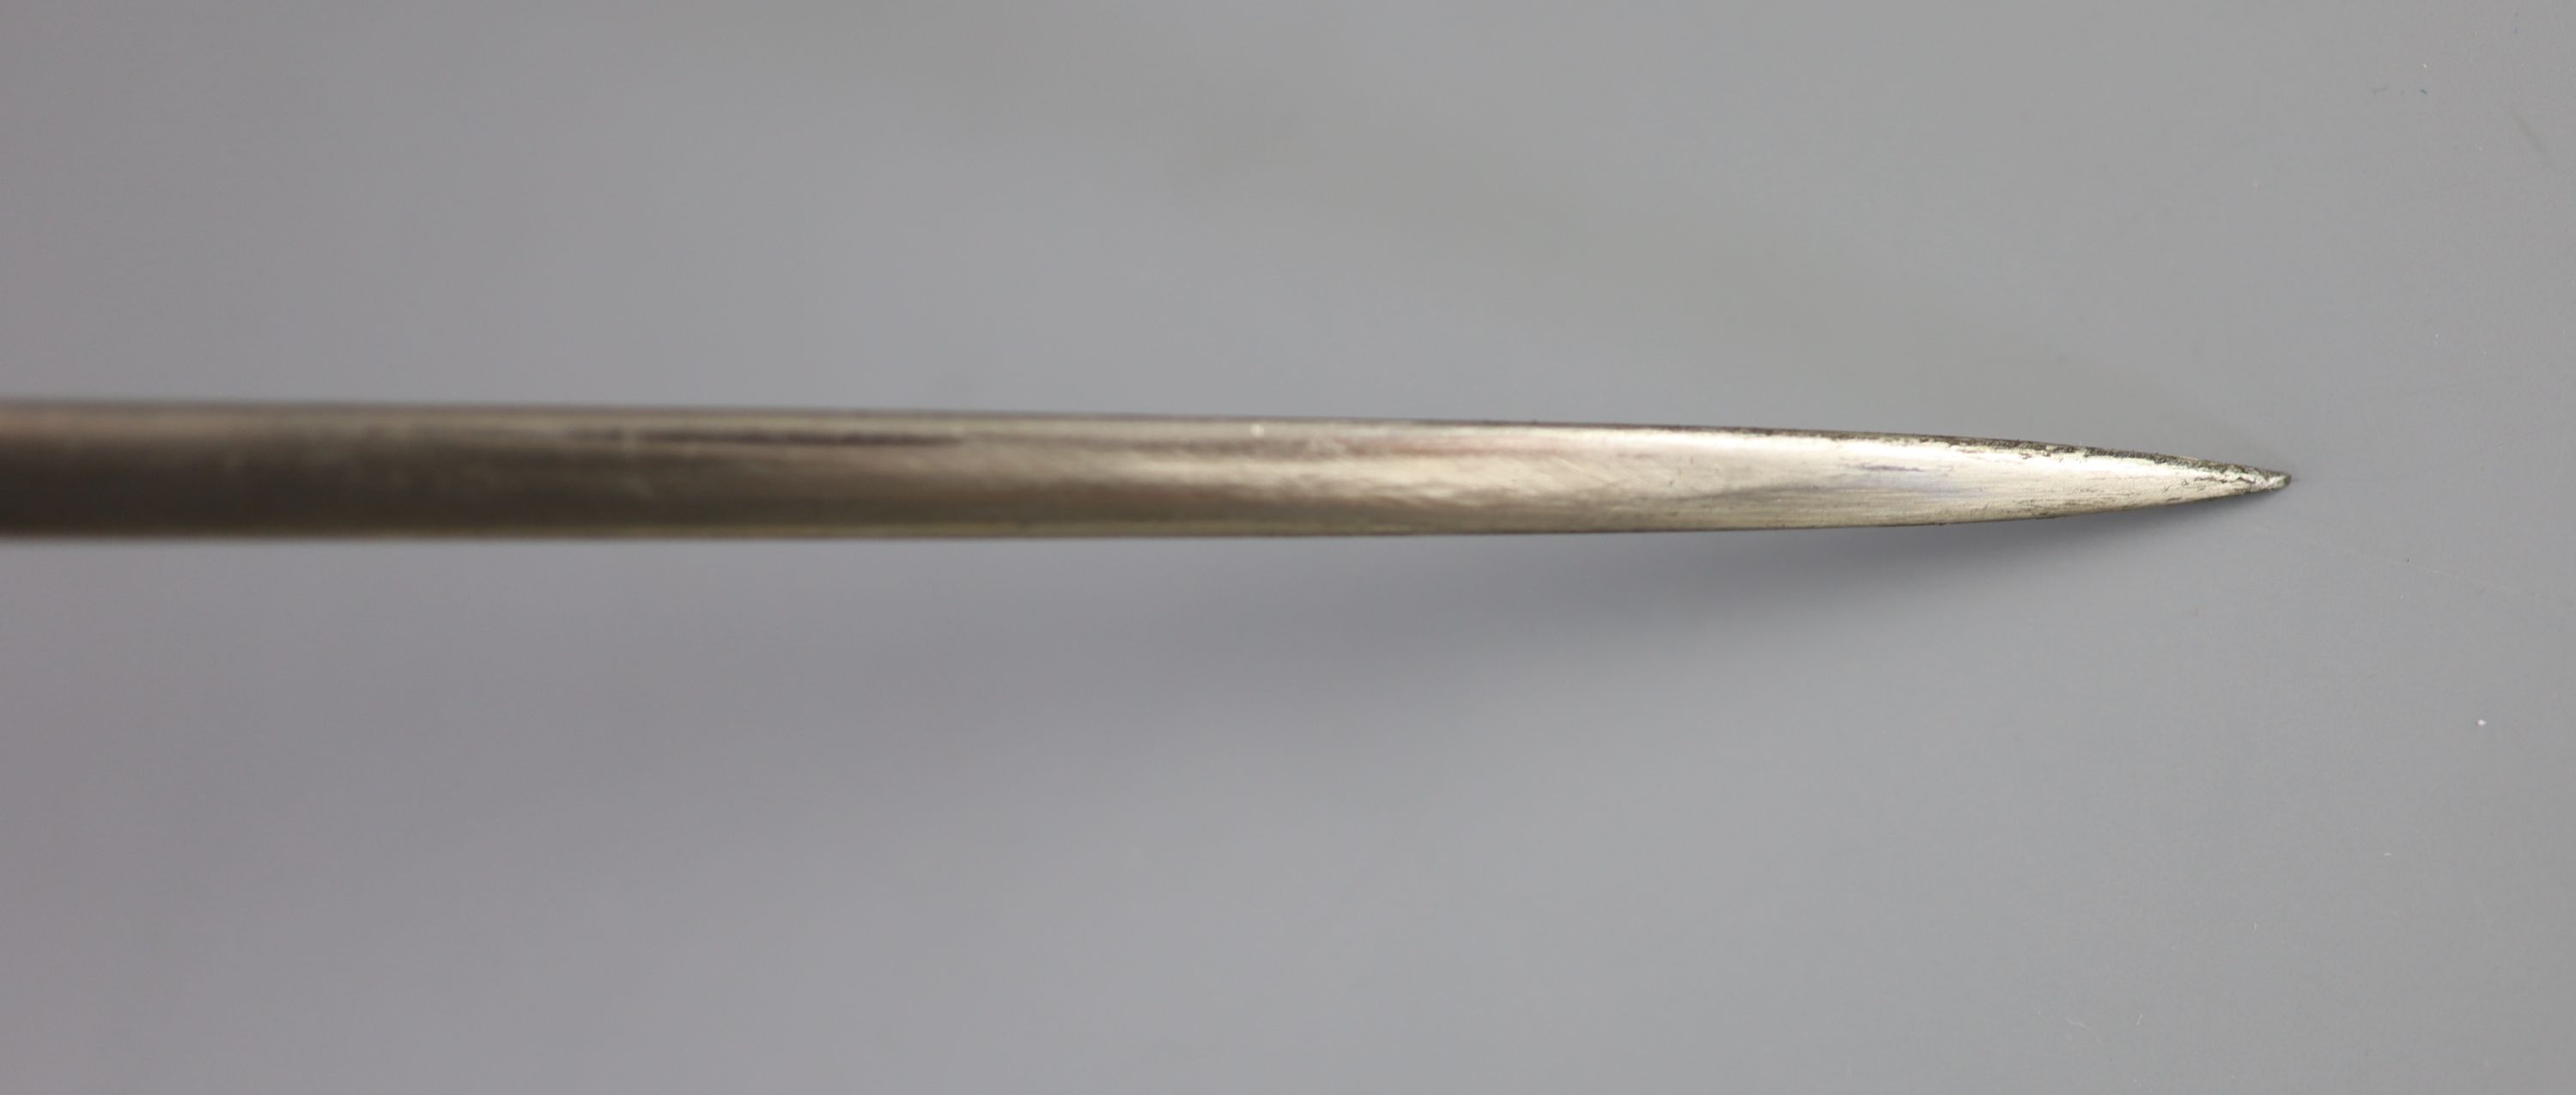 A French Toledo bladed swordstick, 19th century 87cm long